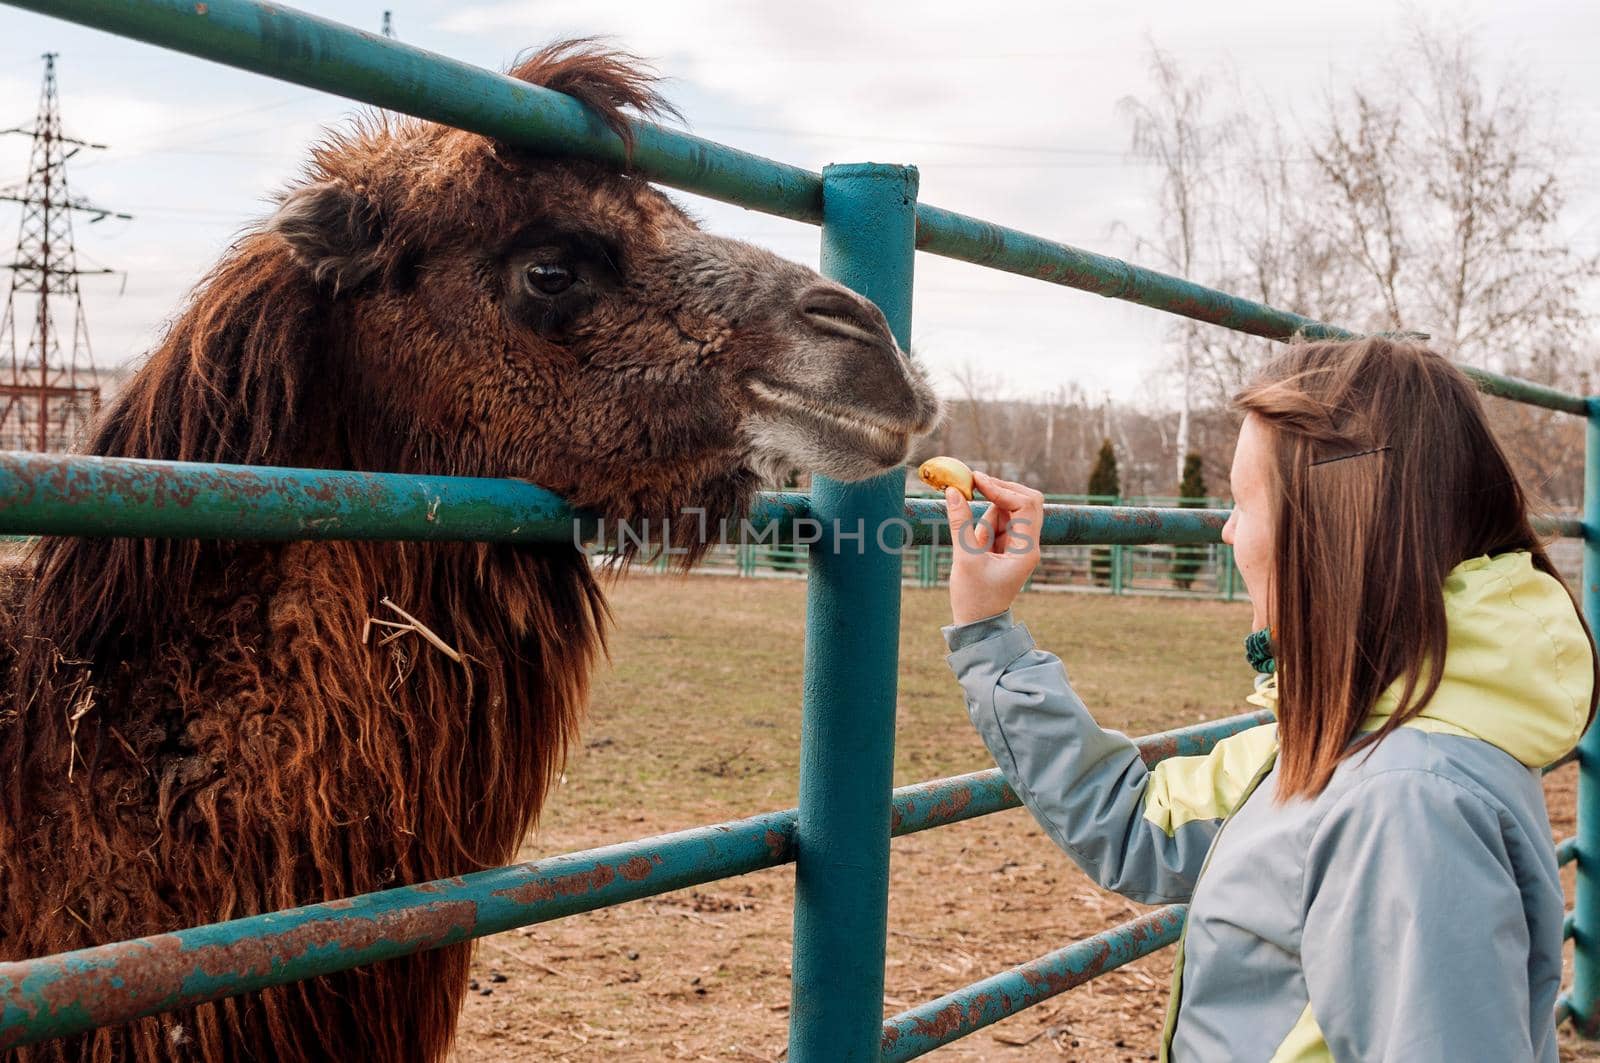 A girl feeds apples from a brown Bactrian camel. The animal is on the farm at the zoo. Camelus bactrianus, a large ungulate animal that lives in the steppes of Central Asia. by Alla_Morozova93